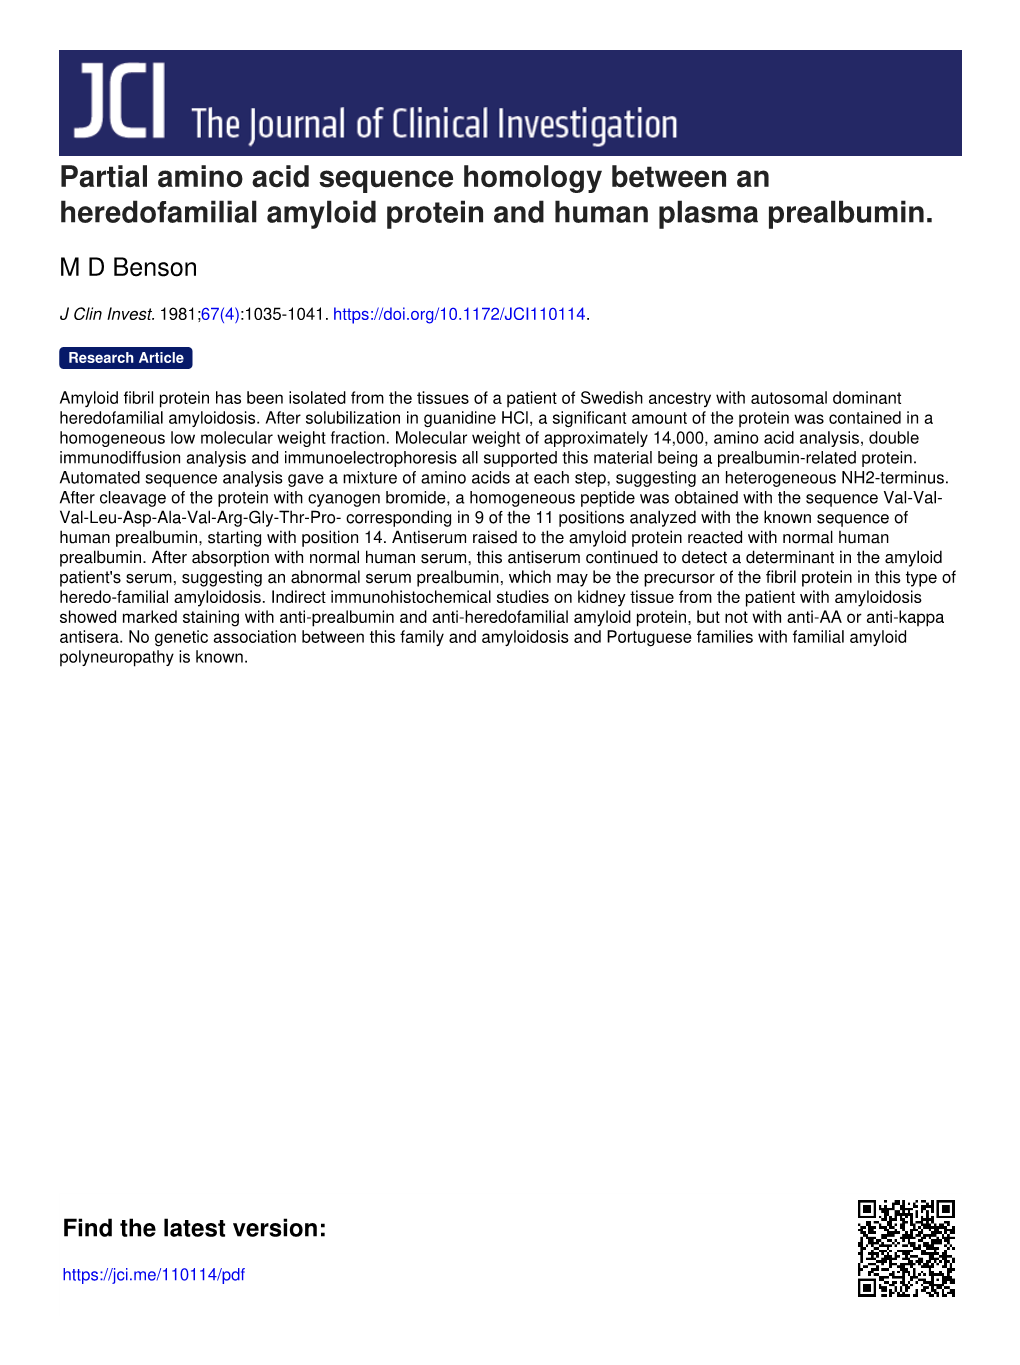 Partial Amino Acid Sequence Homology Between an Heredofamilial Amyloid Protein and Human Plasma Prealbumin